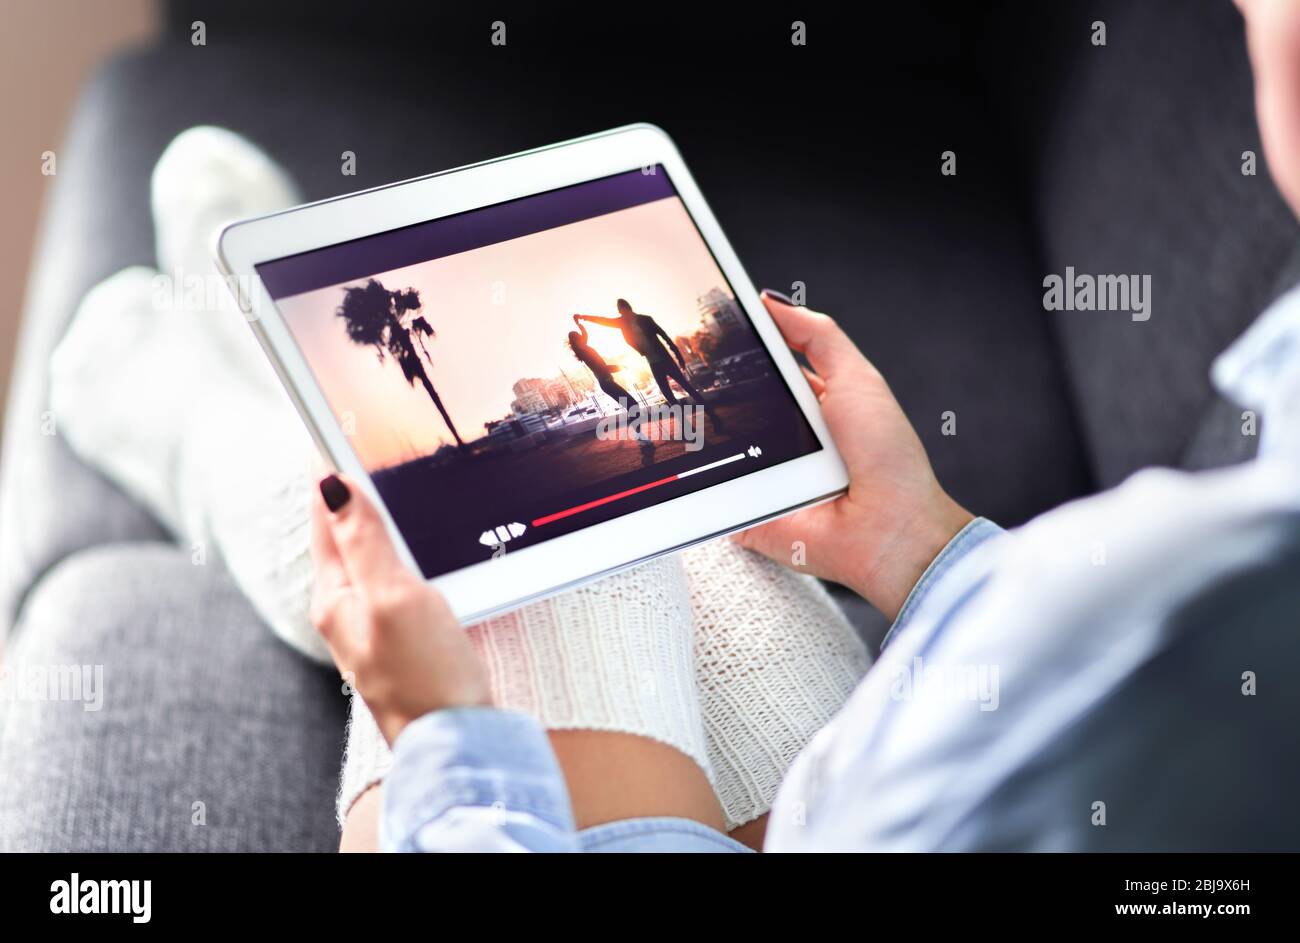 Streaming movie with VOD service. Woman watching online tv series stream. Video on demand app in tablet screen. Television program or film. Stock Photo